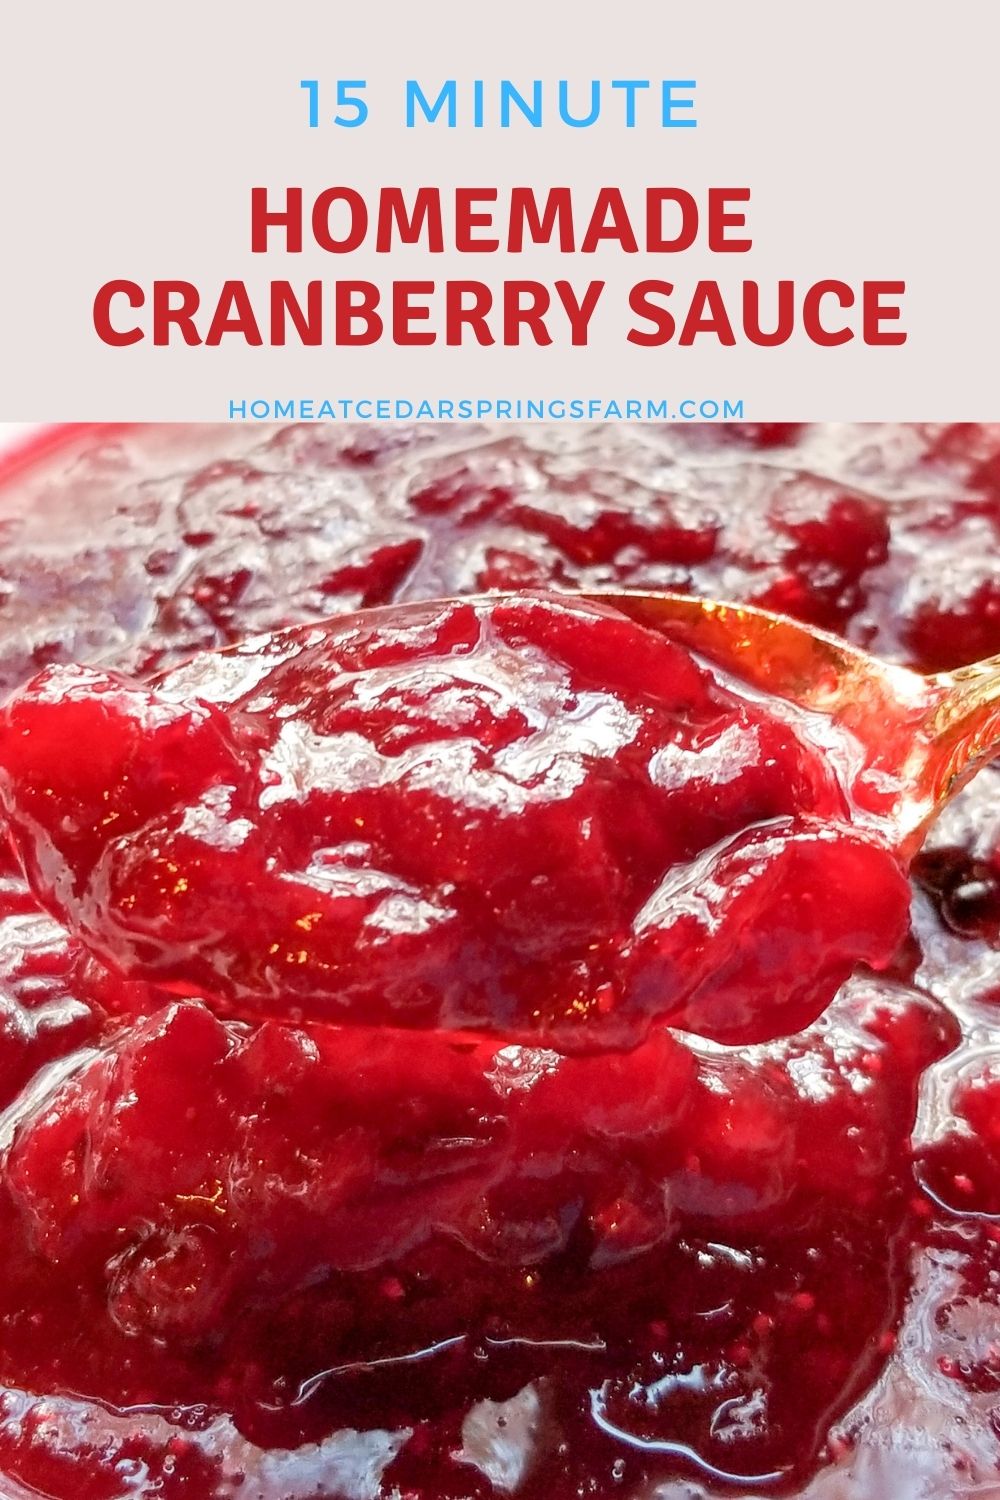 15 Minute Homemade Cranberry Sauce with text overlay